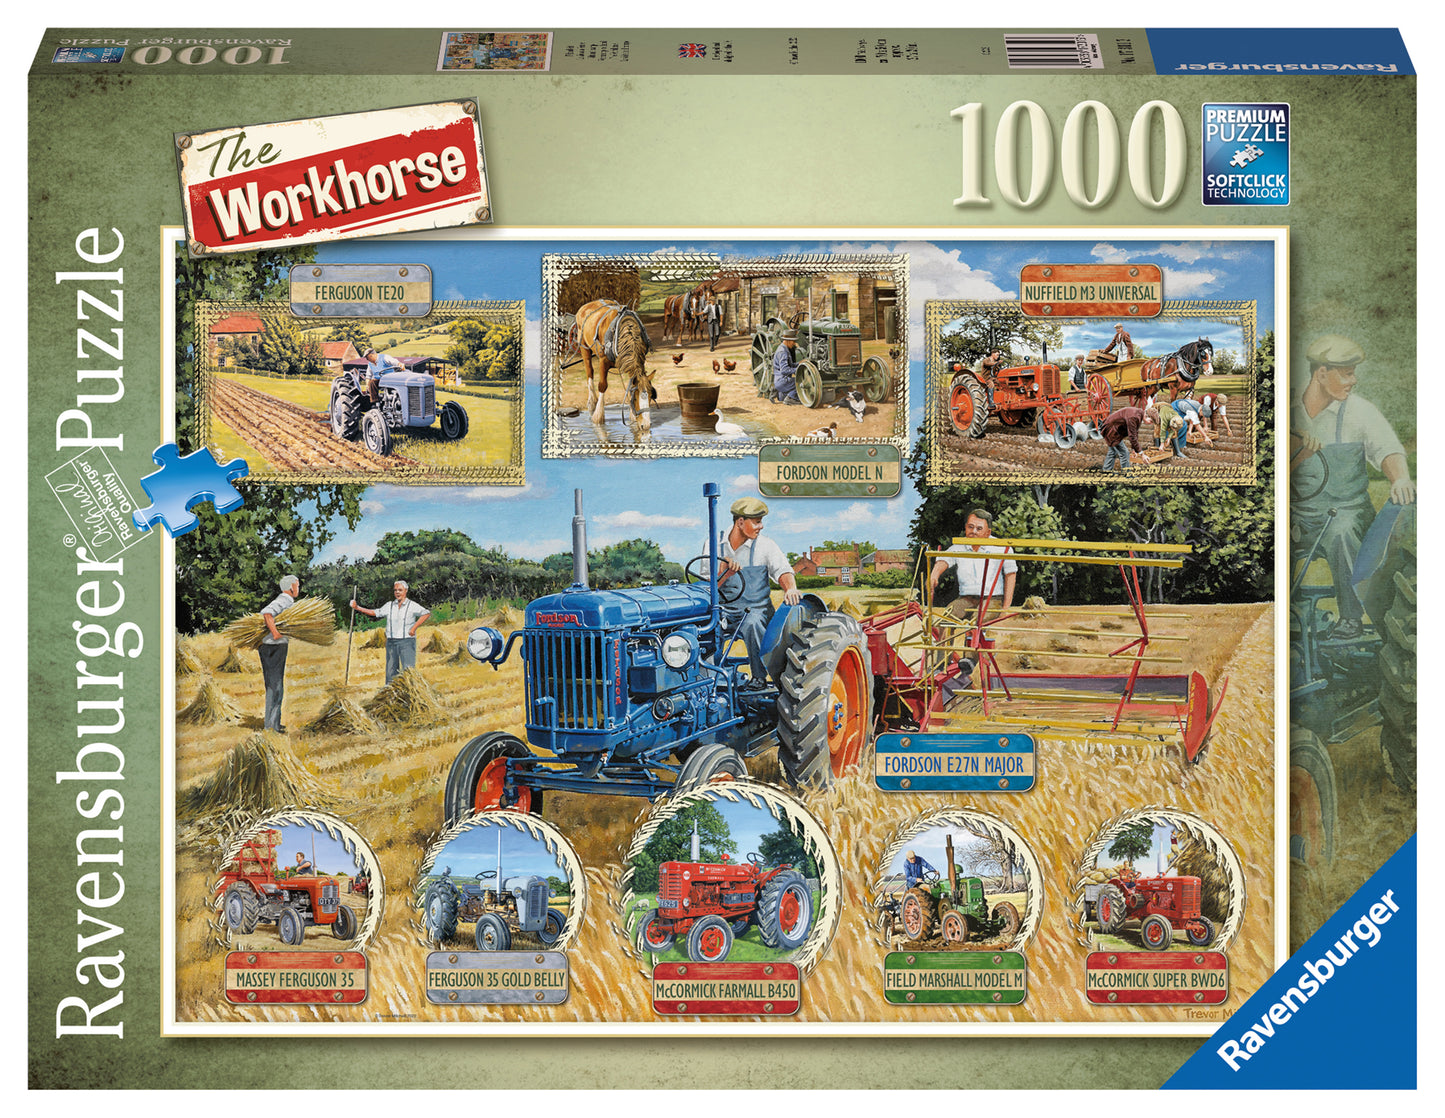 Ravensburger - The Workhorse - 1000 Piece Jigsaw Puzzle